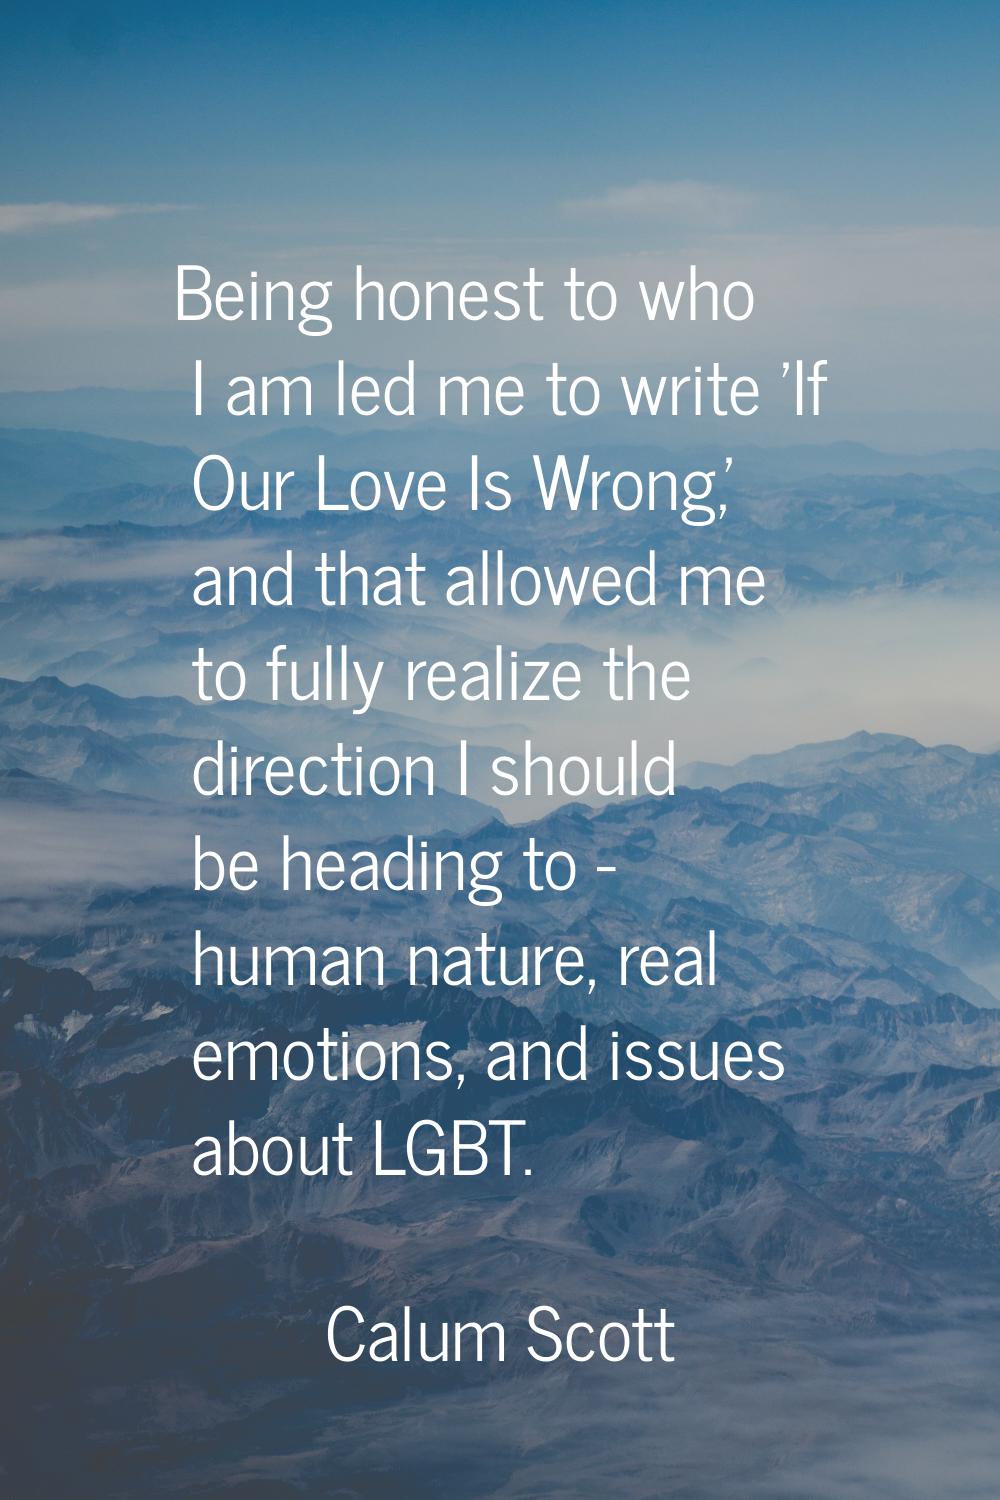 Being honest to who I am led me to write 'If Our Love Is Wrong,' and that allowed me to fully reali